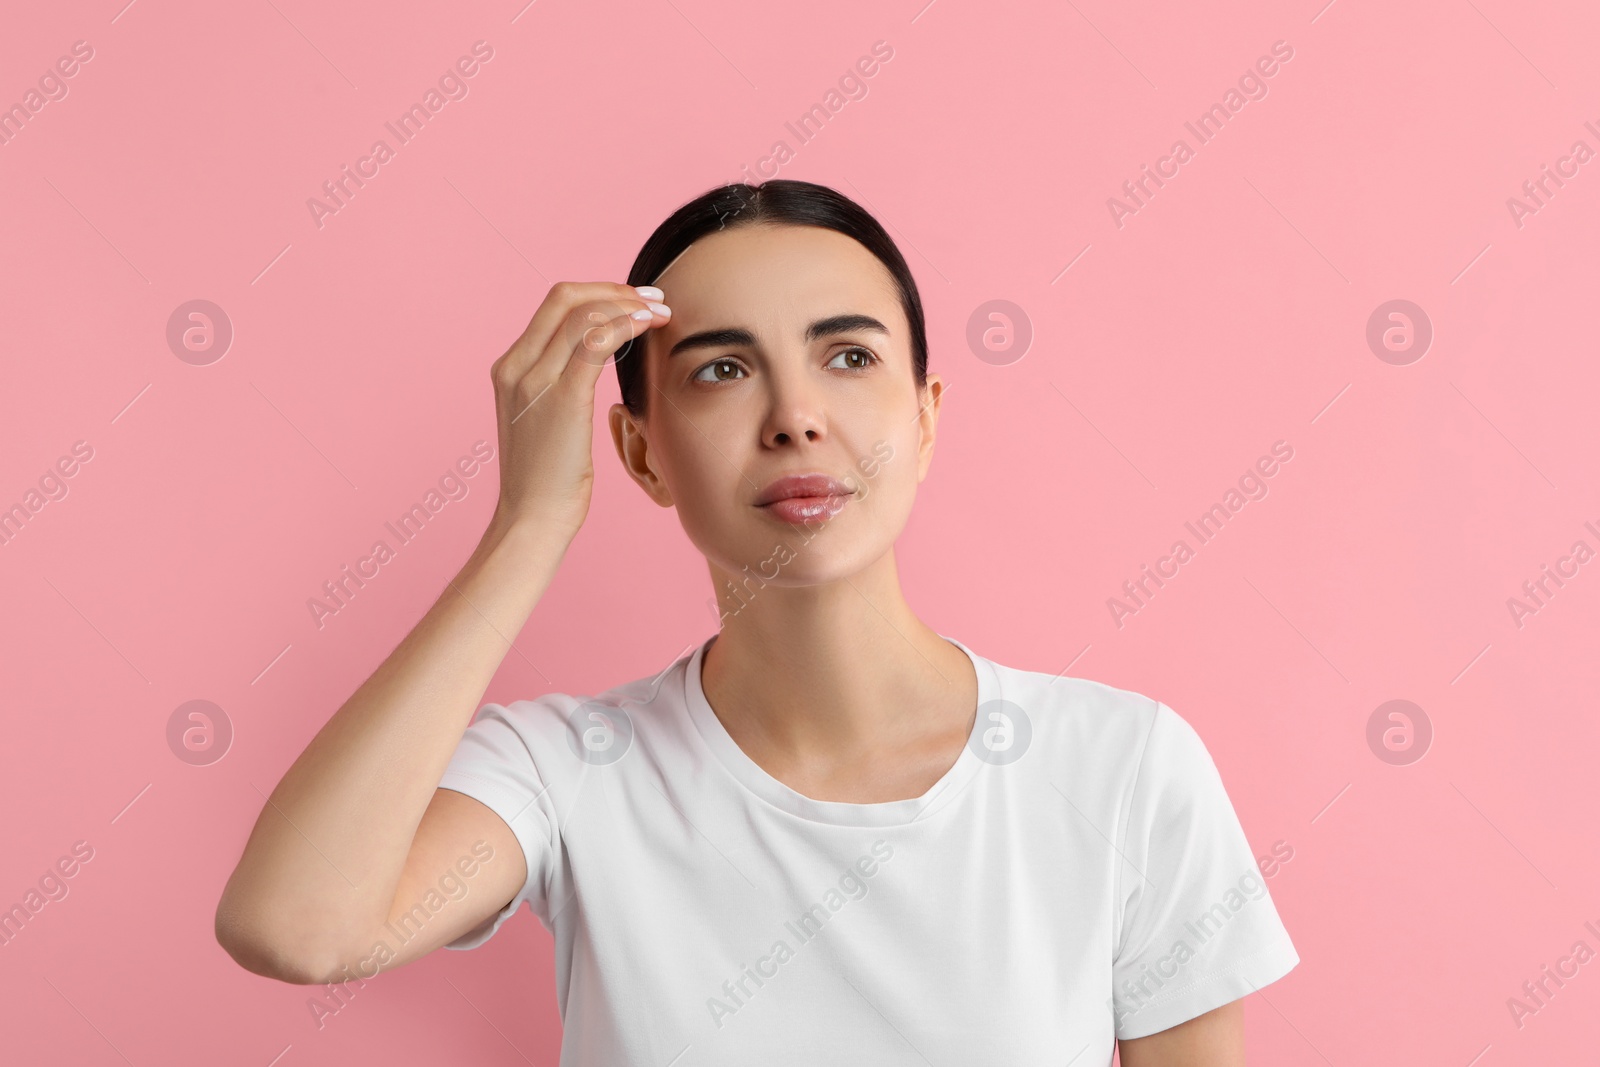 Photo of Woman with dry skin checking her face on pink background